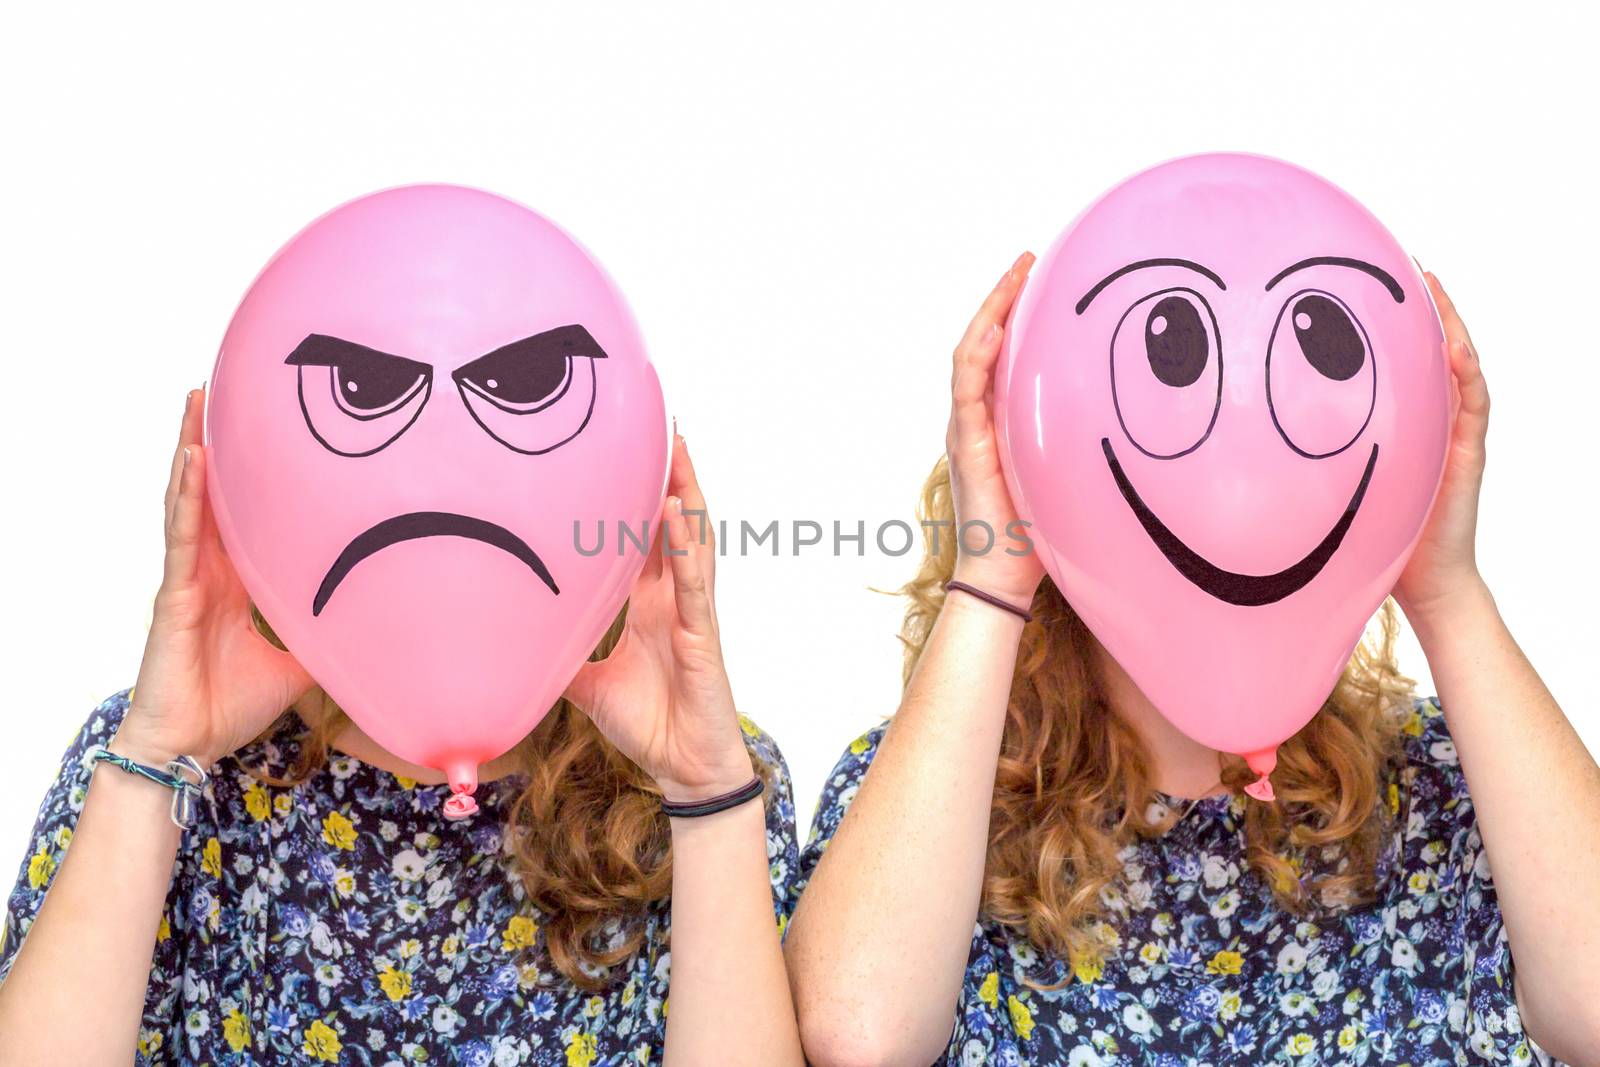 Two girls holding pink balloons with facial expressions by BenSchonewille